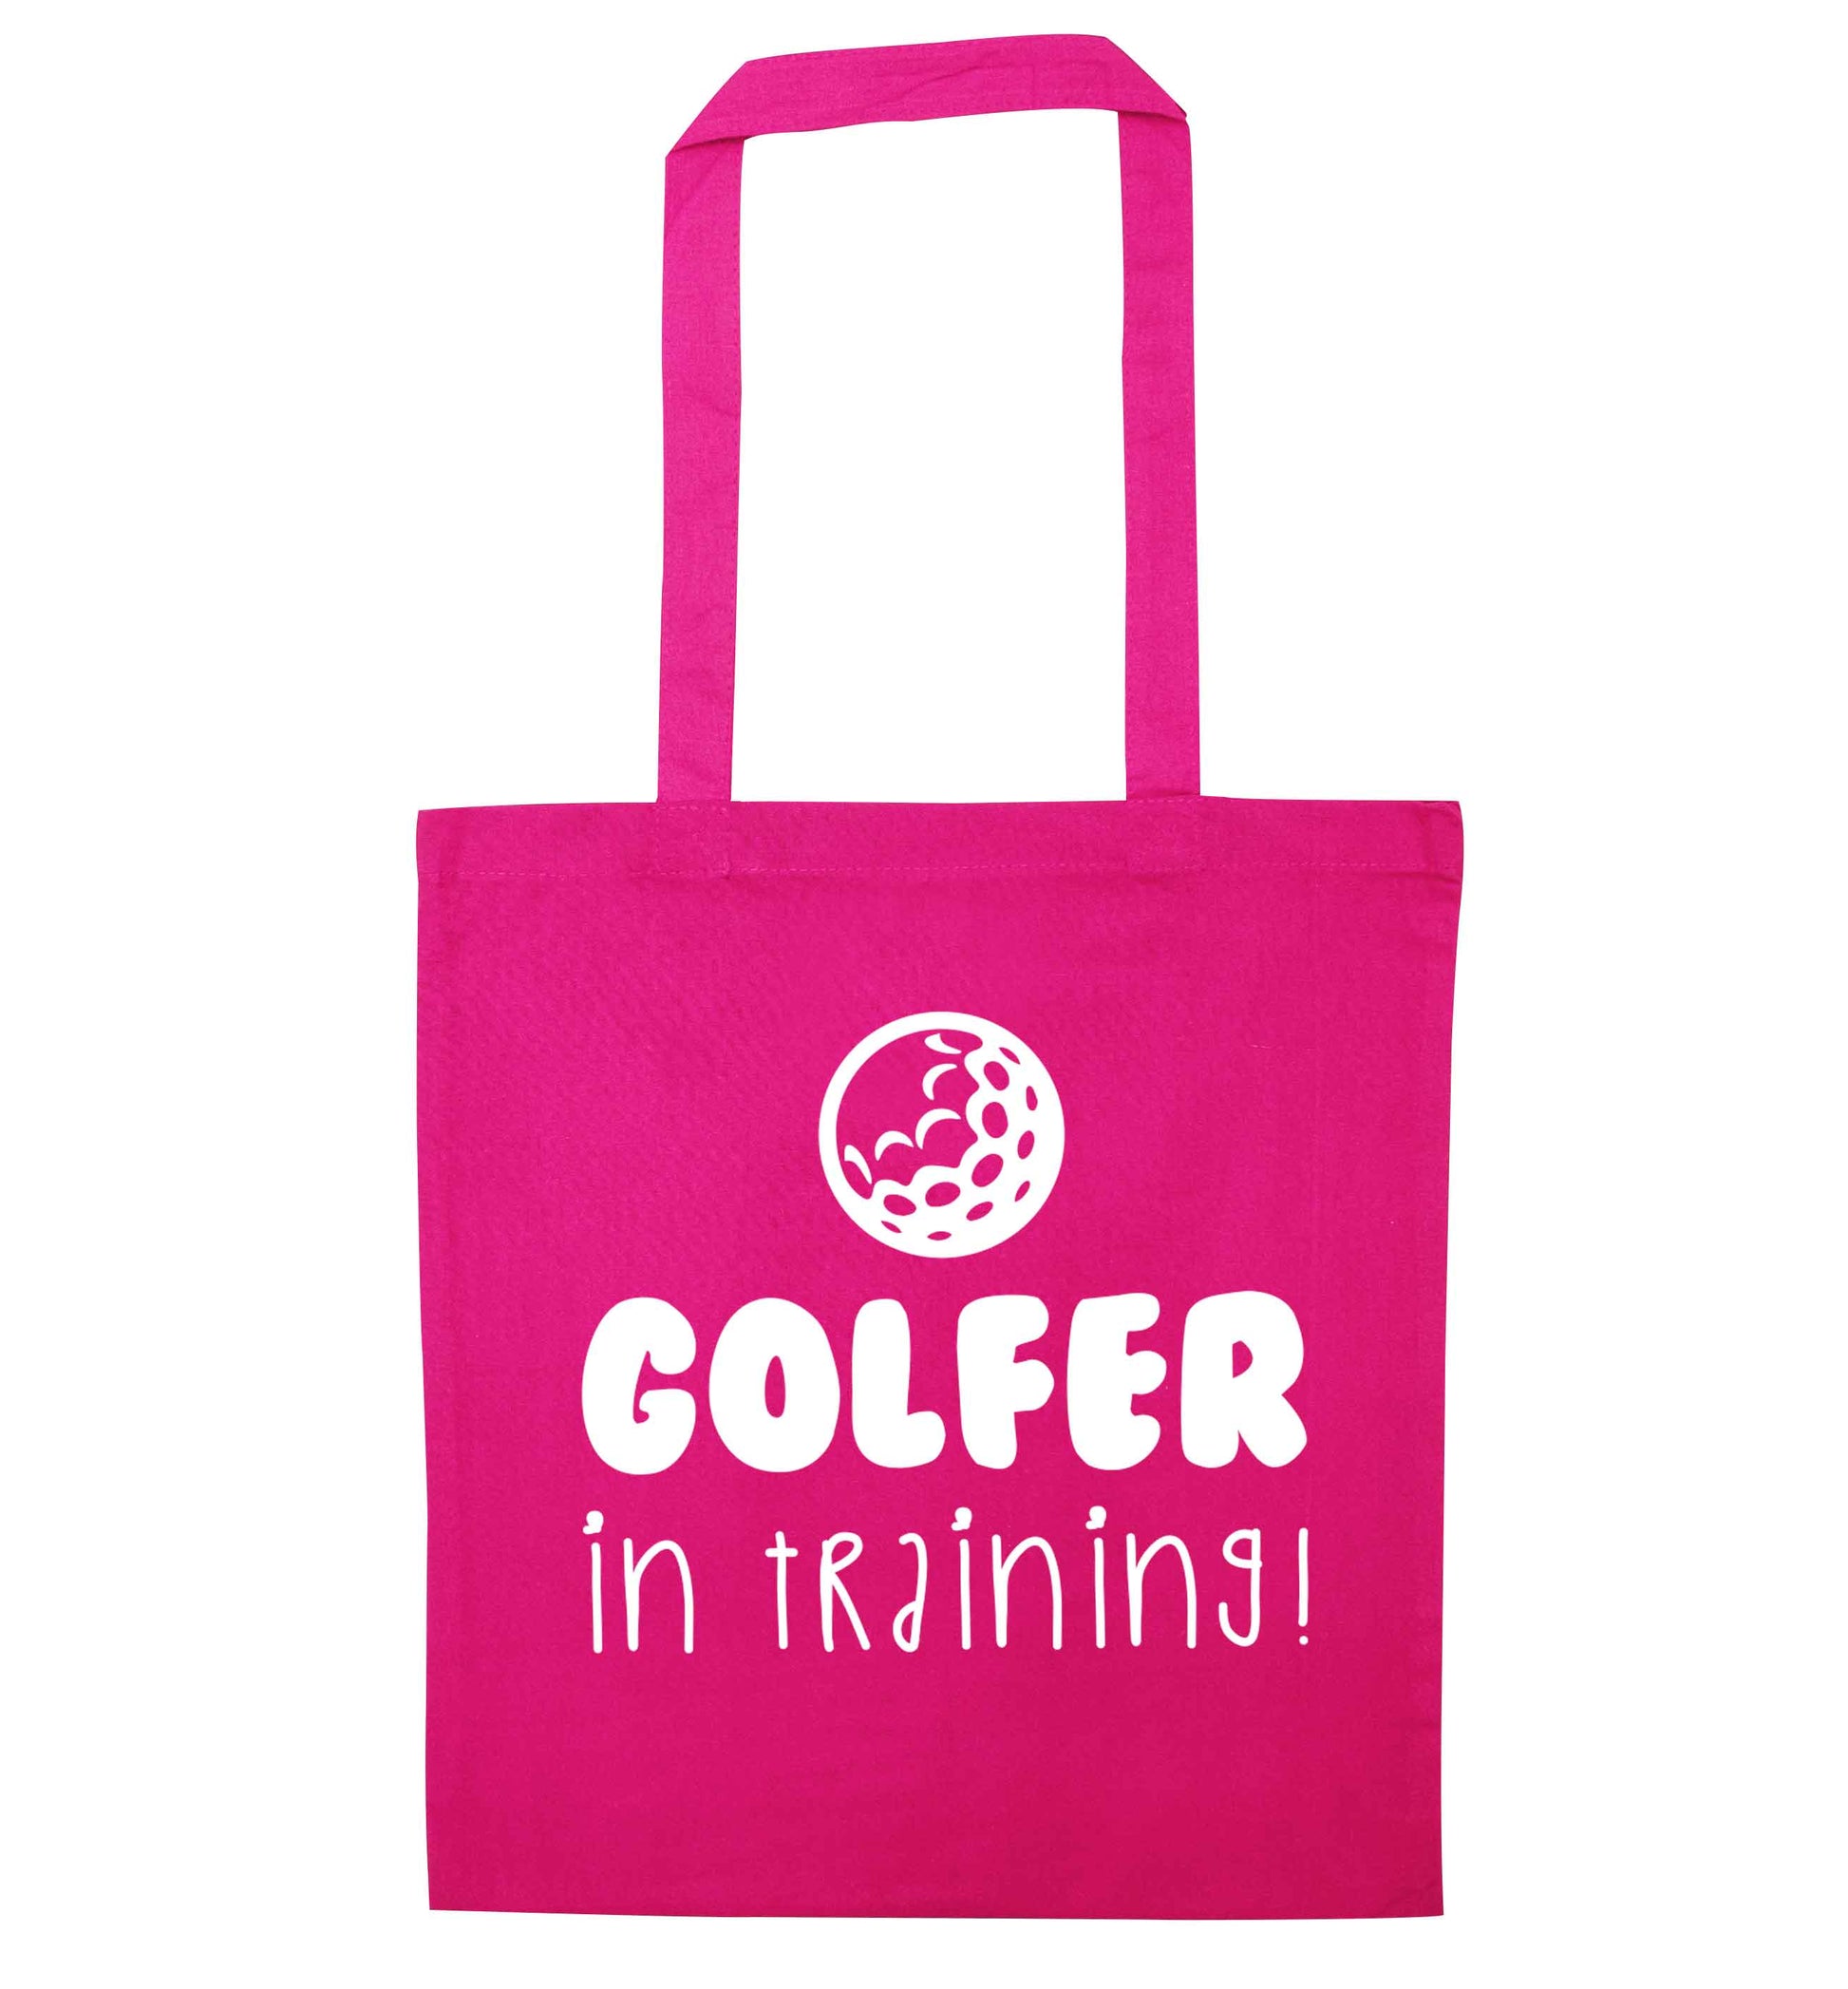 Golfer in training pink tote bag